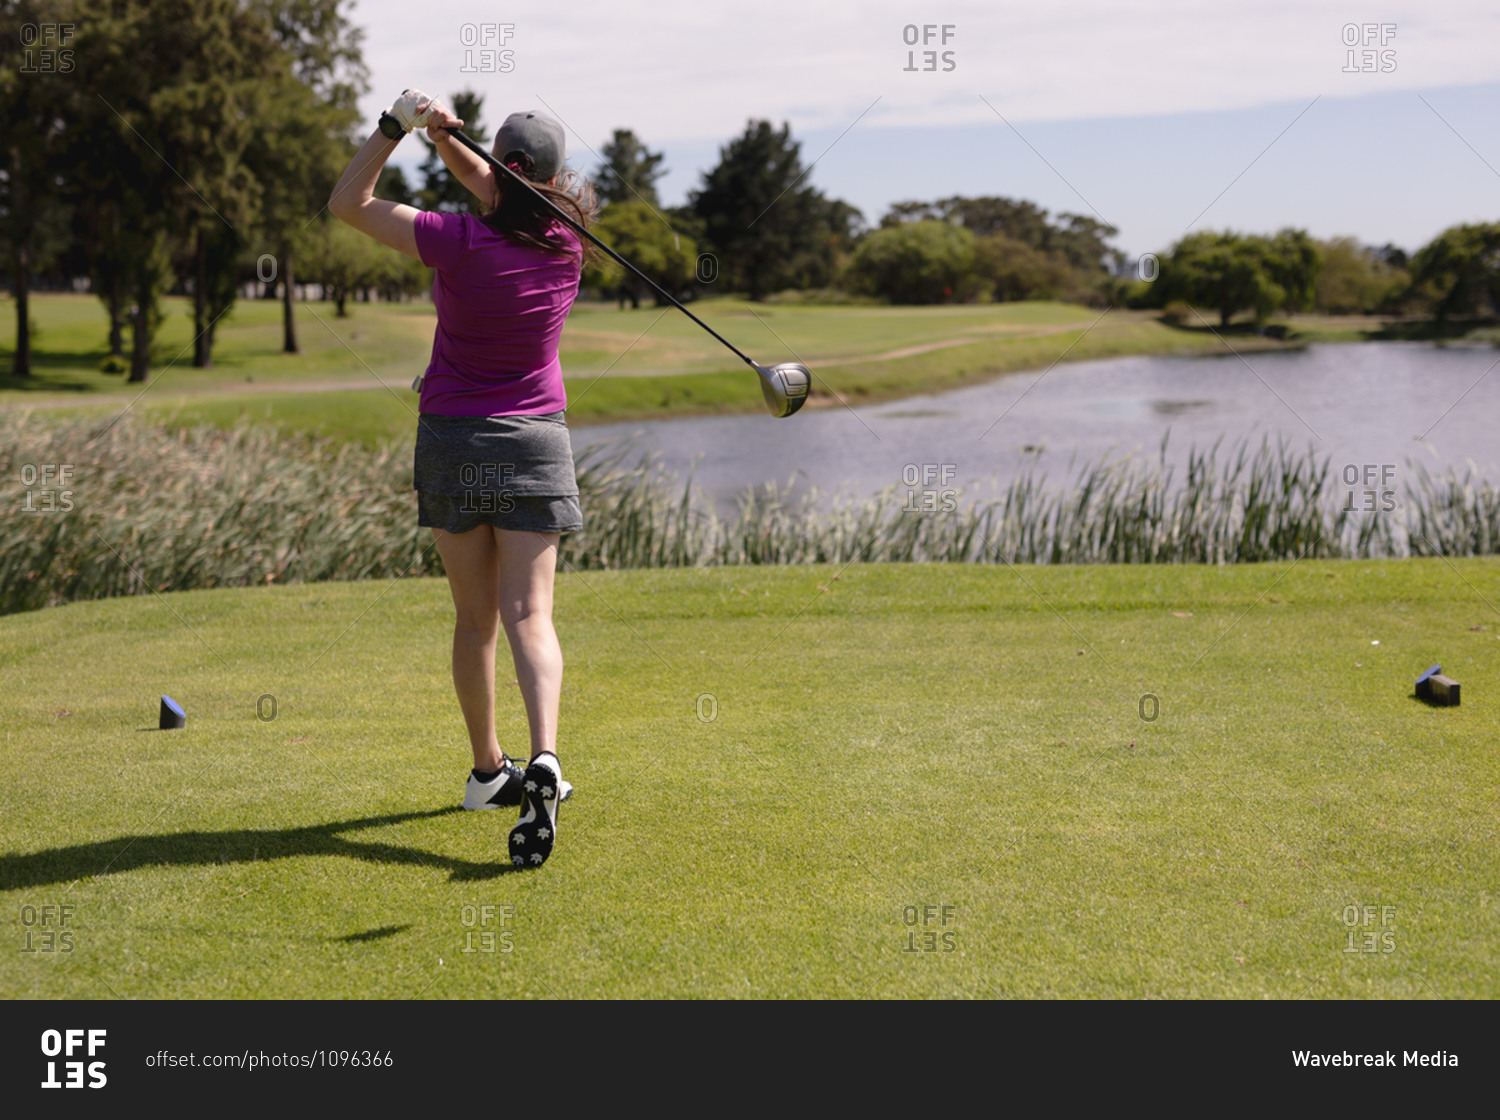 Caucasian woman playing golf swinging club and taking a shot. sport leisure hobbies golf healthy outdoor lifestyle.